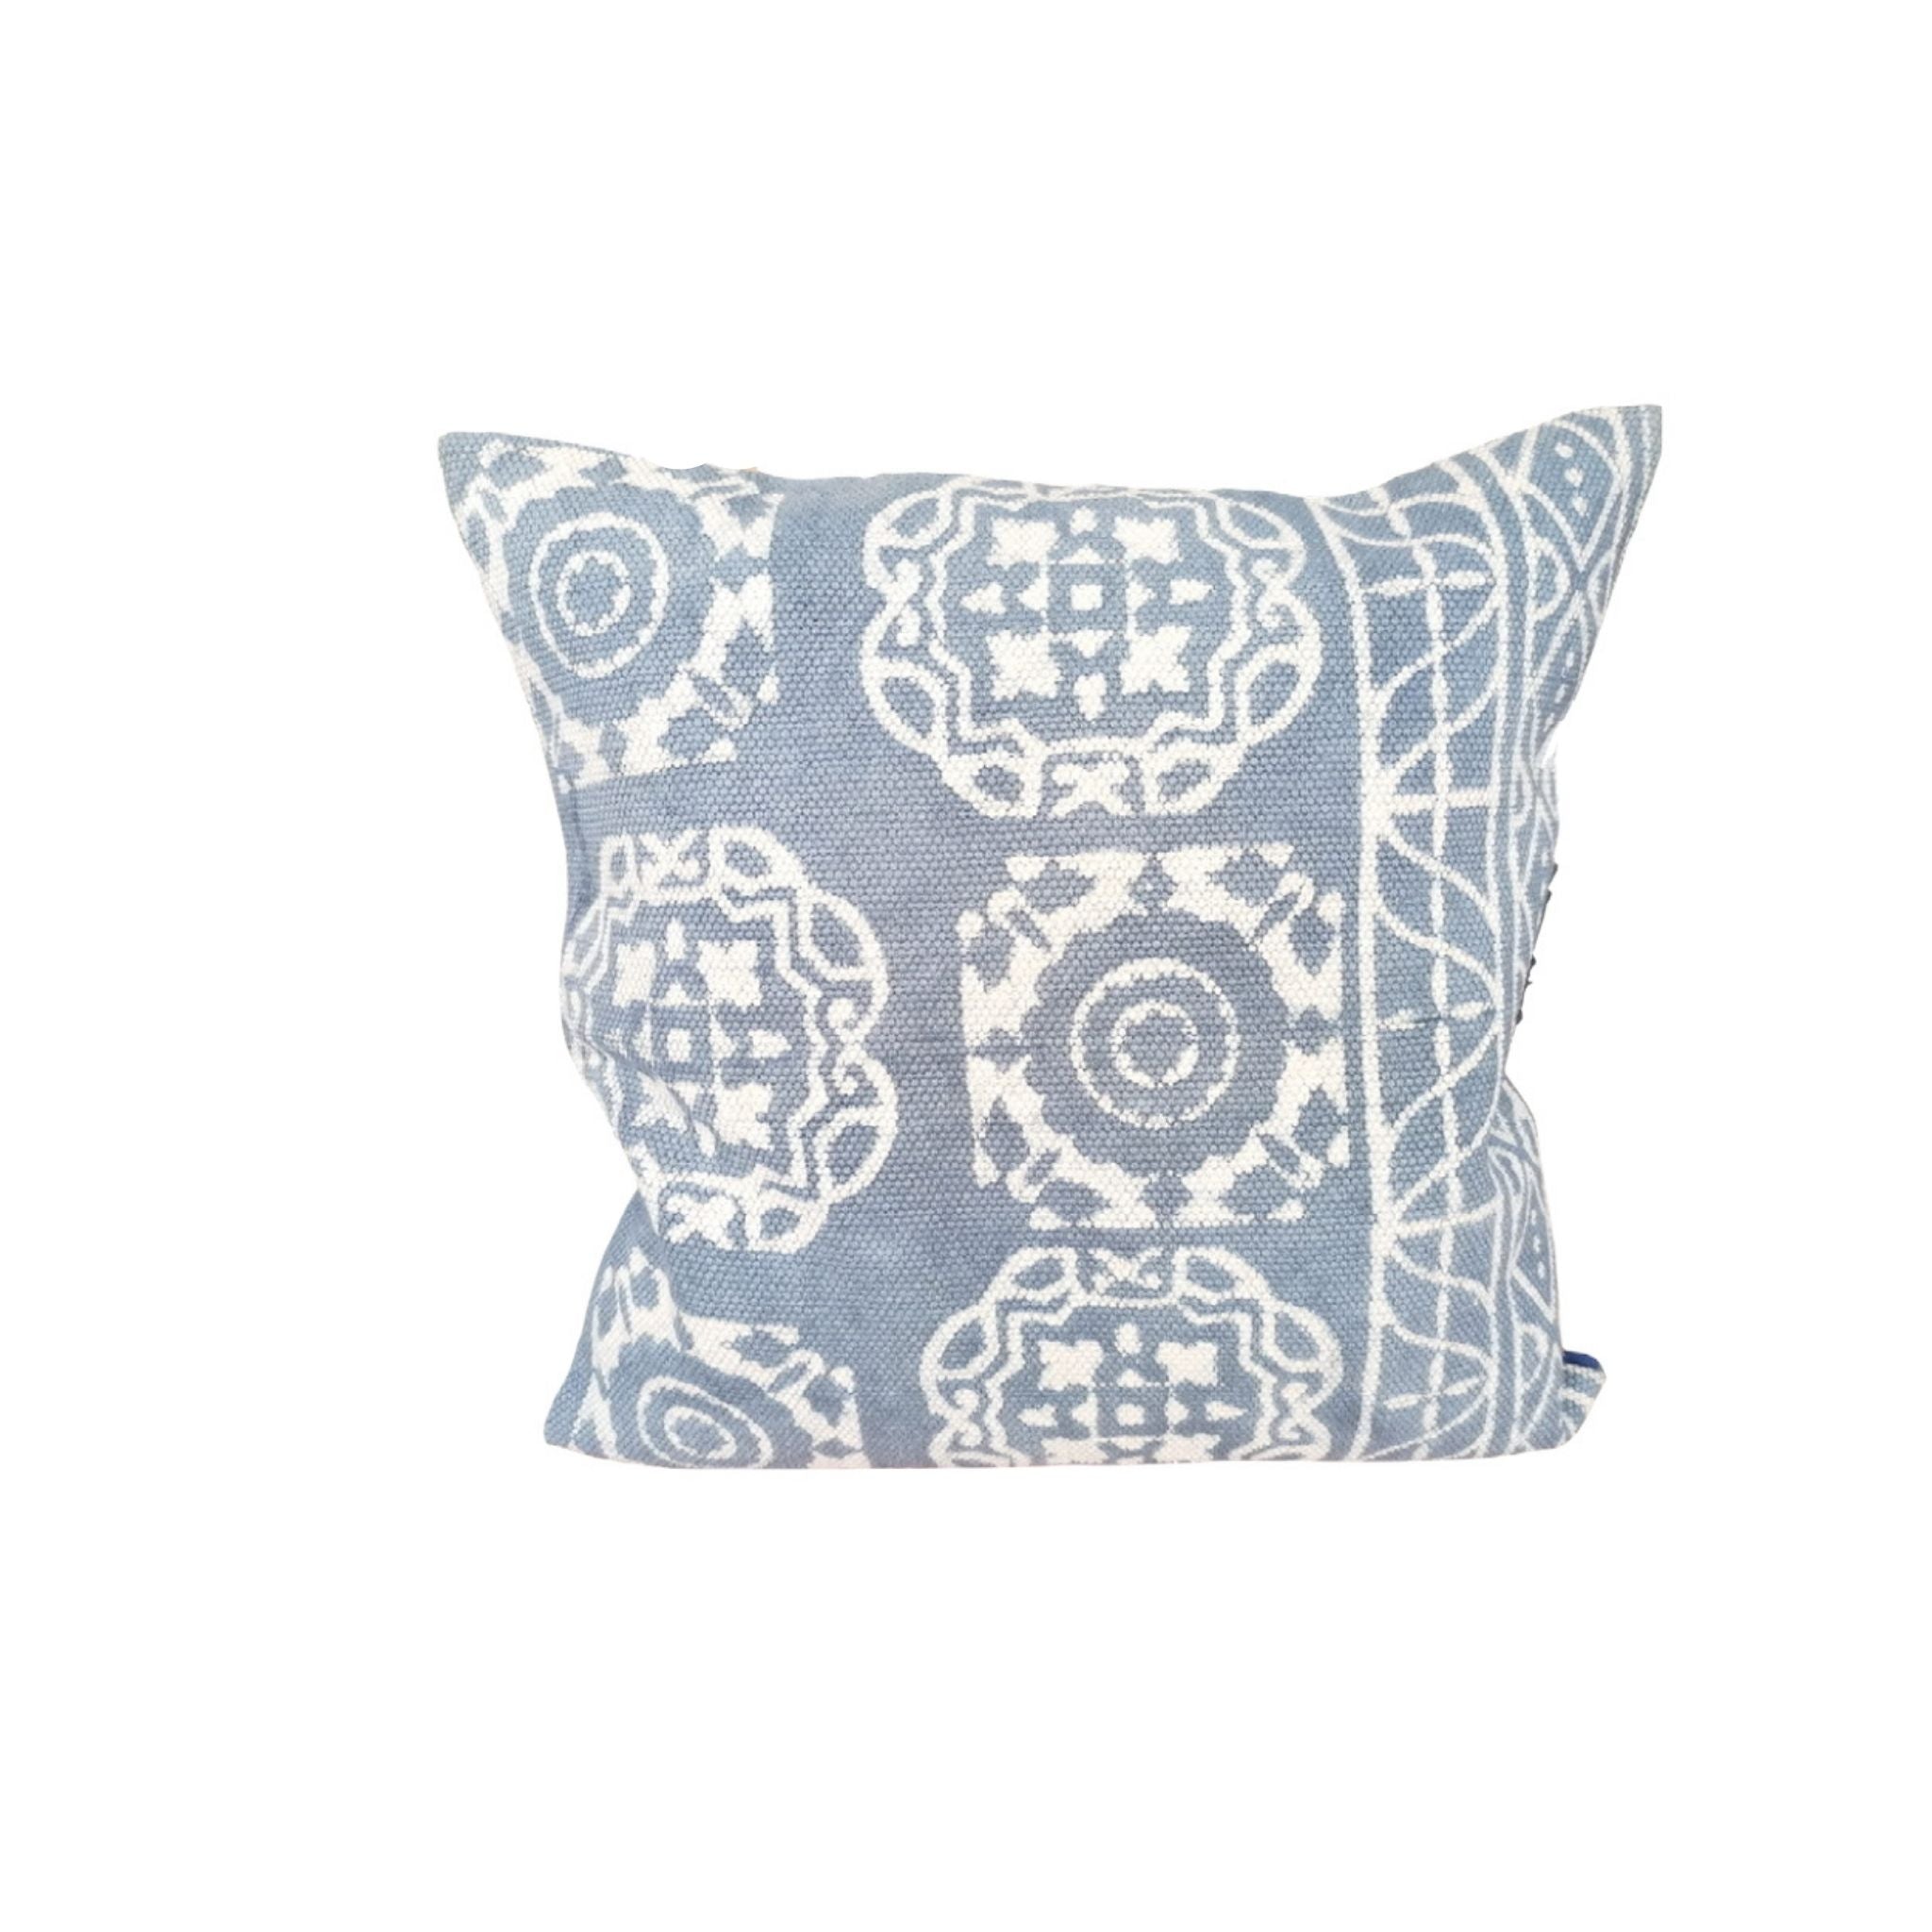 Block Hand Printed Cushions Blue and White Pattern